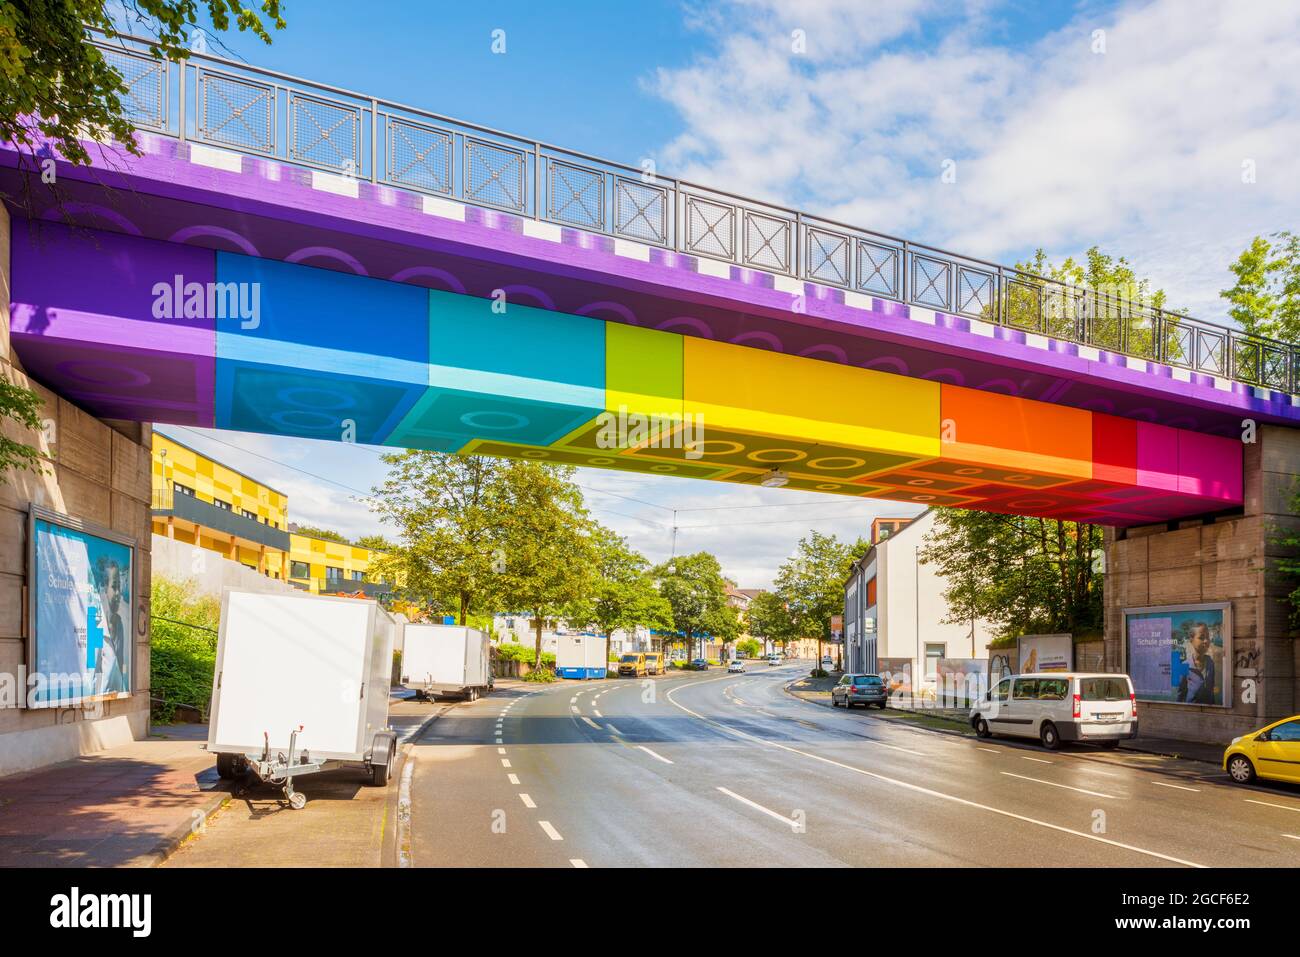 The Lego Bridge 2.0 or Rainbow Bridge in Wuppertal, Germany, painted in July 2020 by graffiti artist Martin Heuwold in the style of Lego bricks Stock Photo